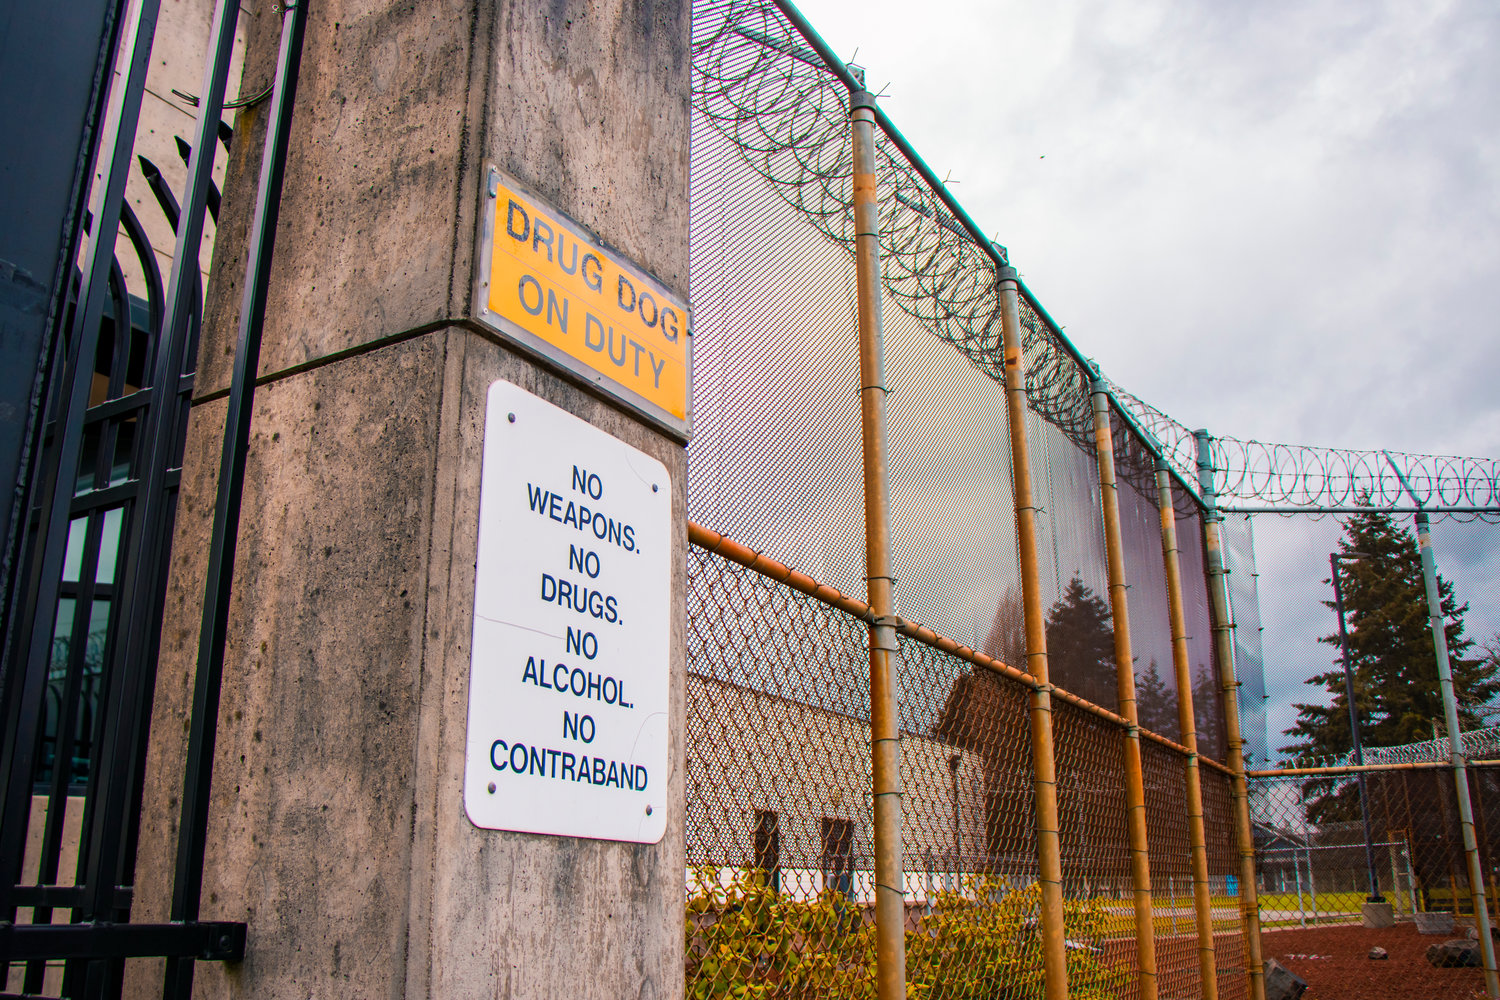 Signage prohibits weapons, drugs, alcohol and contraband within the fences lined with razor wire around the Green Hill School in Chehalis on Friday.